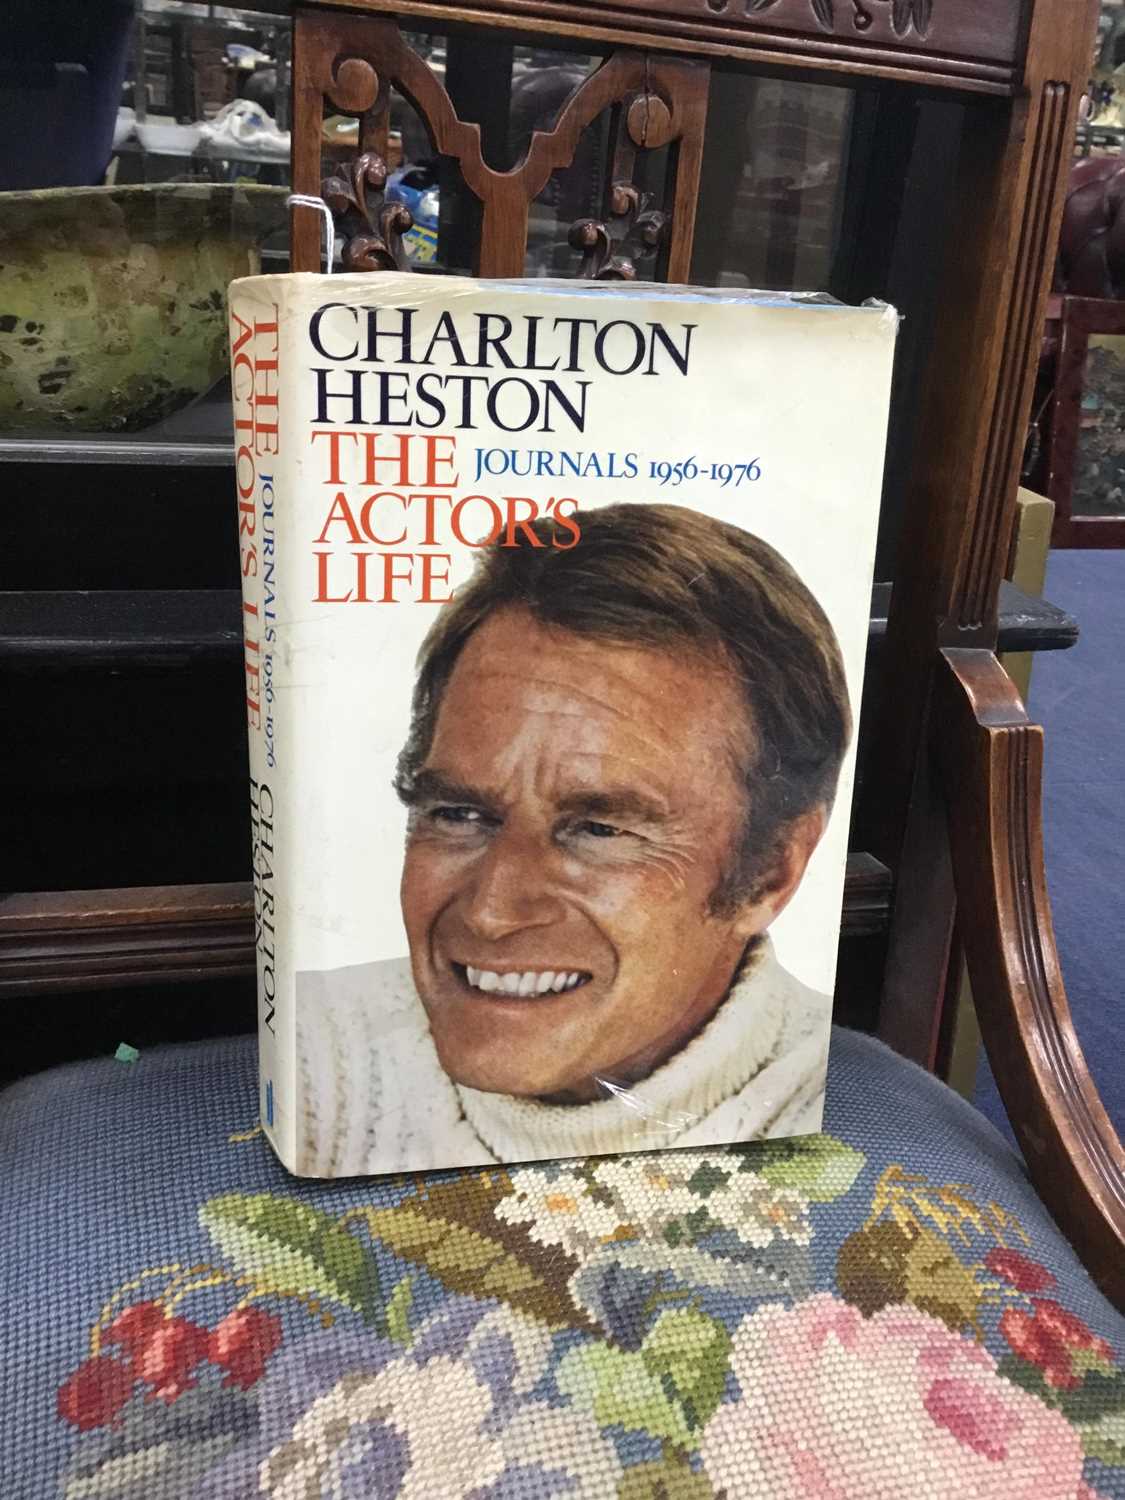 Lot 68 - A SIGNED COPY OF THE ACTOR'S LIFE BY CHARLTON HESTON